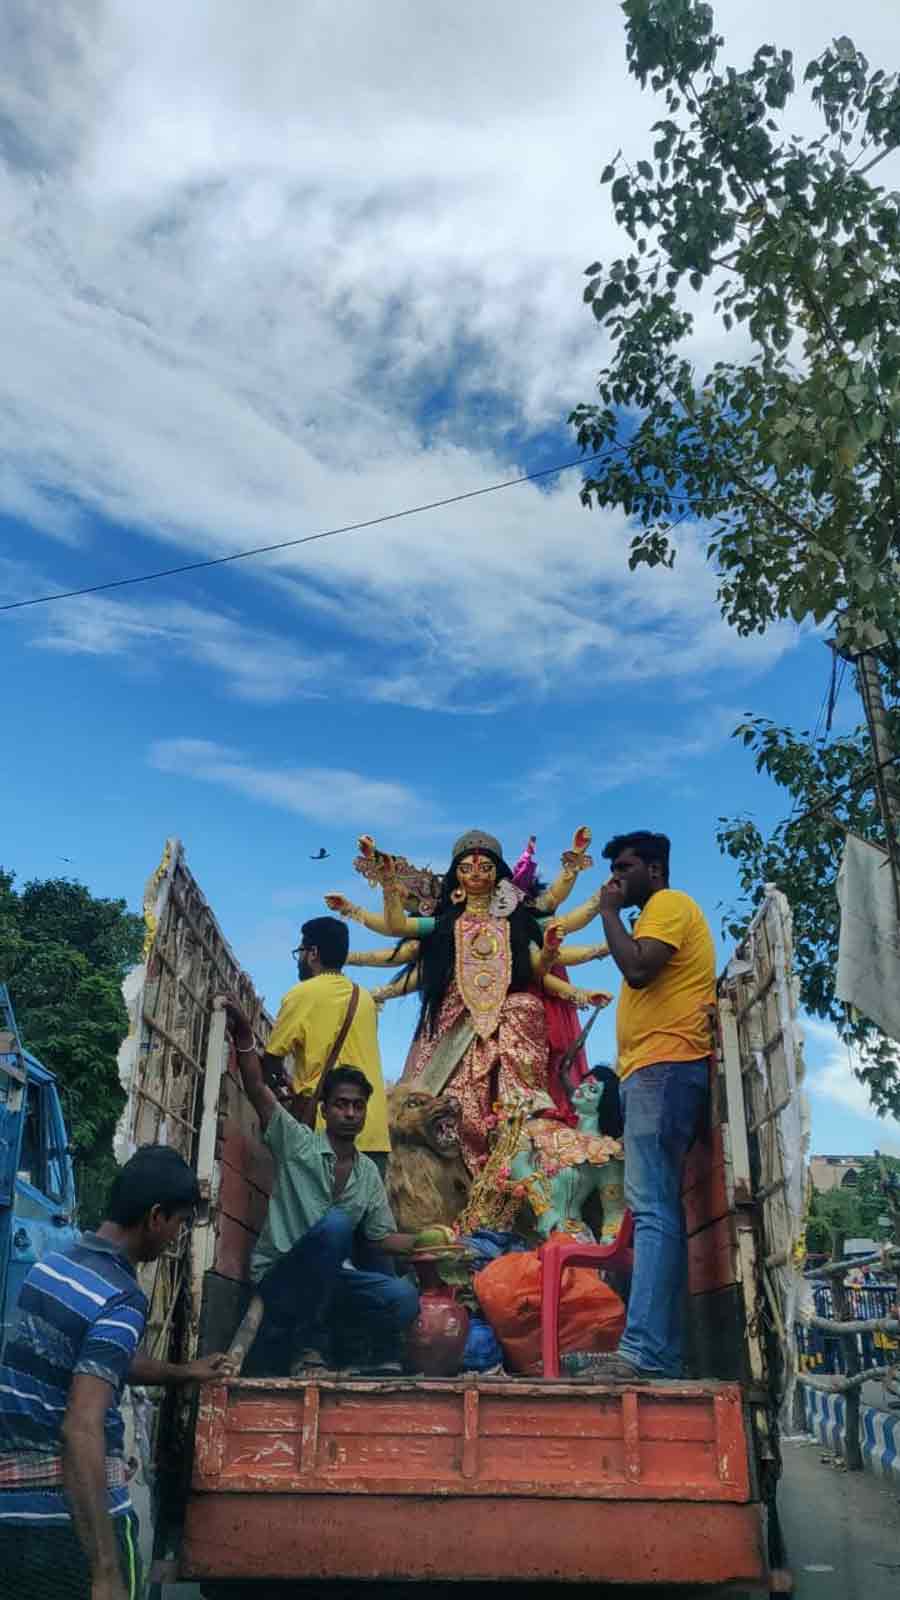 Between Prinsep ghat and Babughat, several idols of the Goddess were seen being taken for immersion